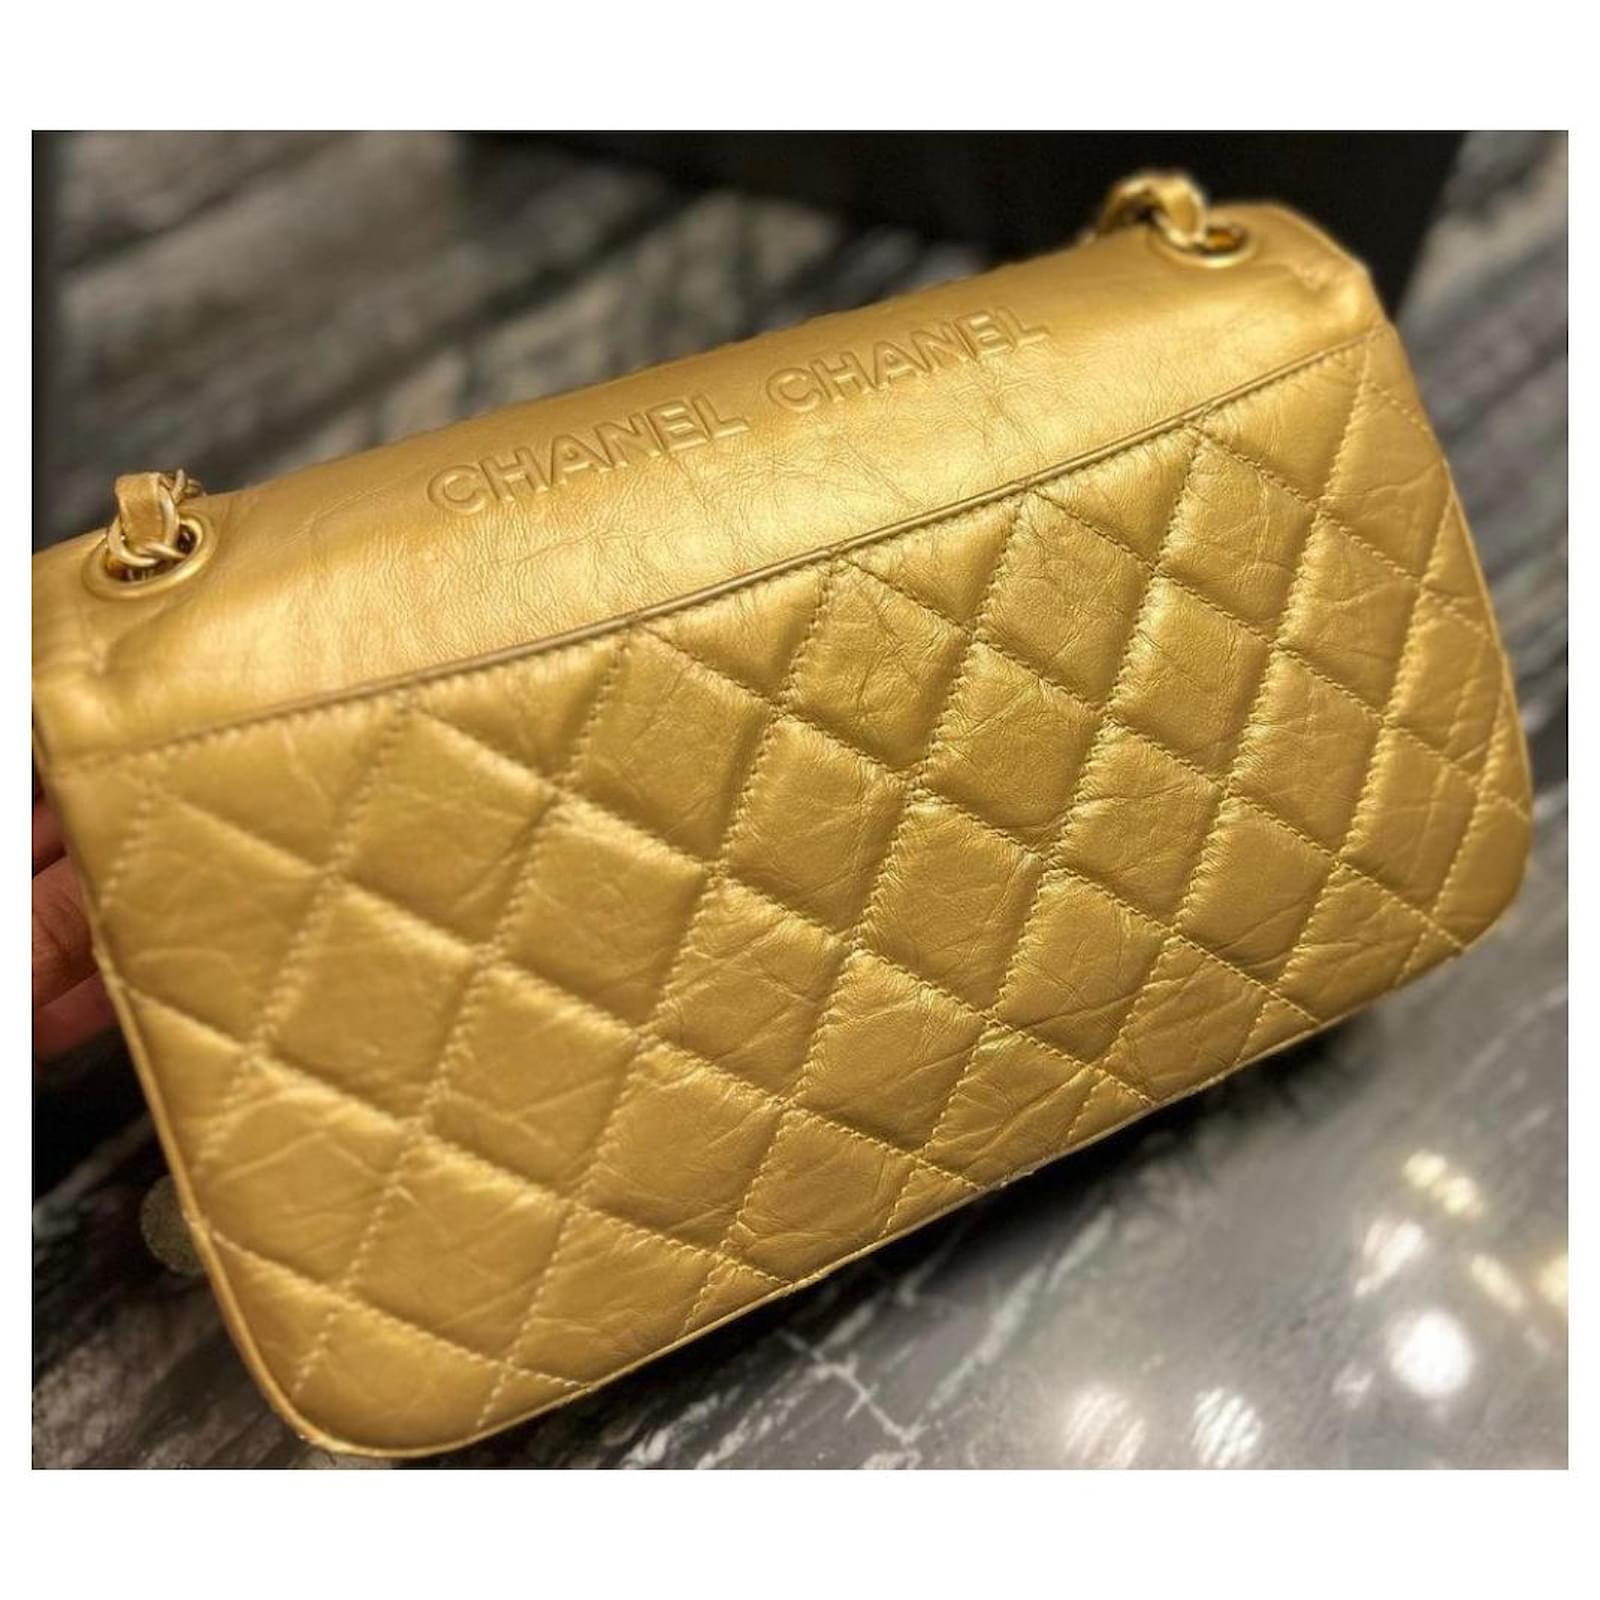 Rare Chanel Limited Edition Paris-Dallas Timeless Classic Small Flap Bag in  Gold Lambskin with Gold Hardware. All Inclusions, LIKE NEW.